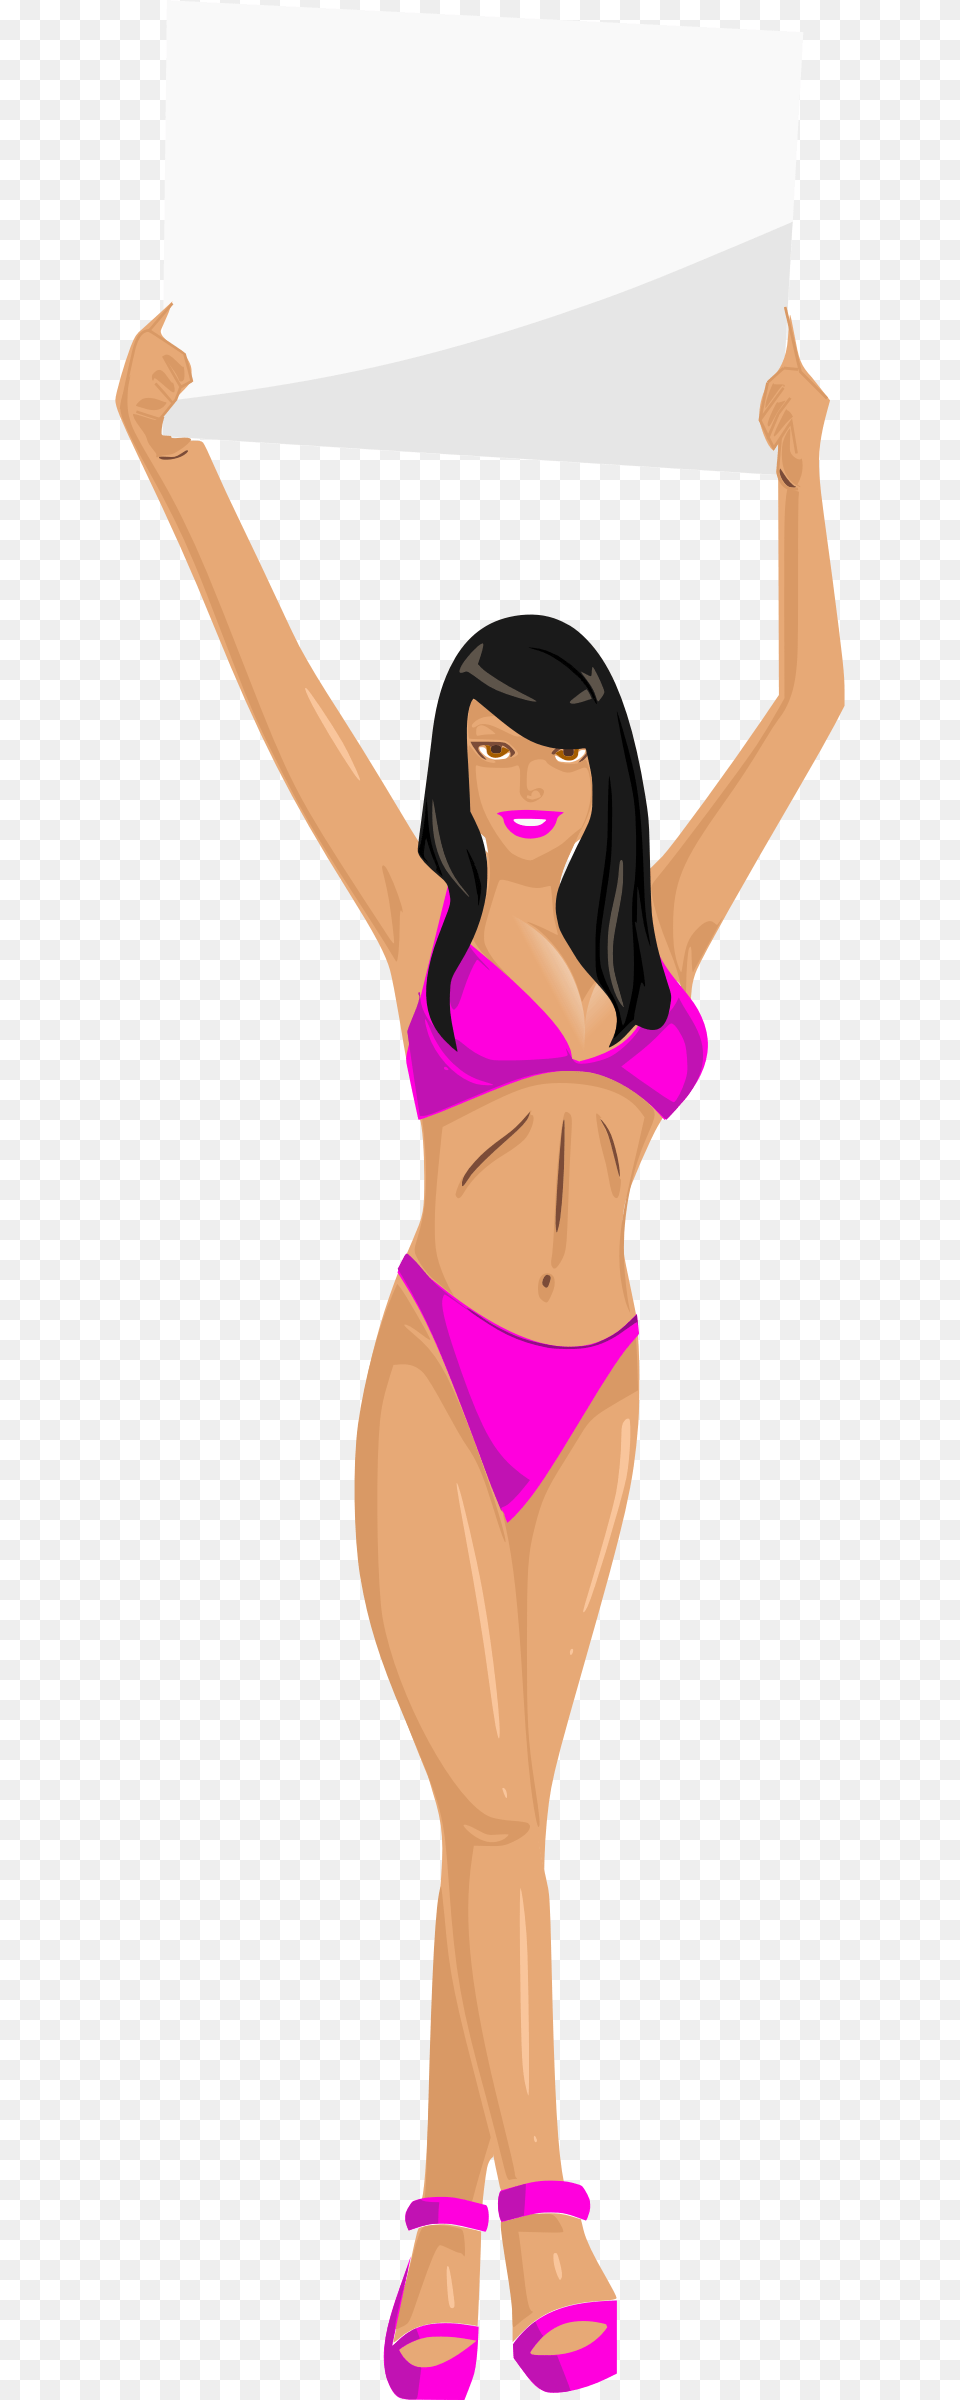 This Icons Design Of Girl With Sign, Bikini, Clothing, Swimwear, Adult Png